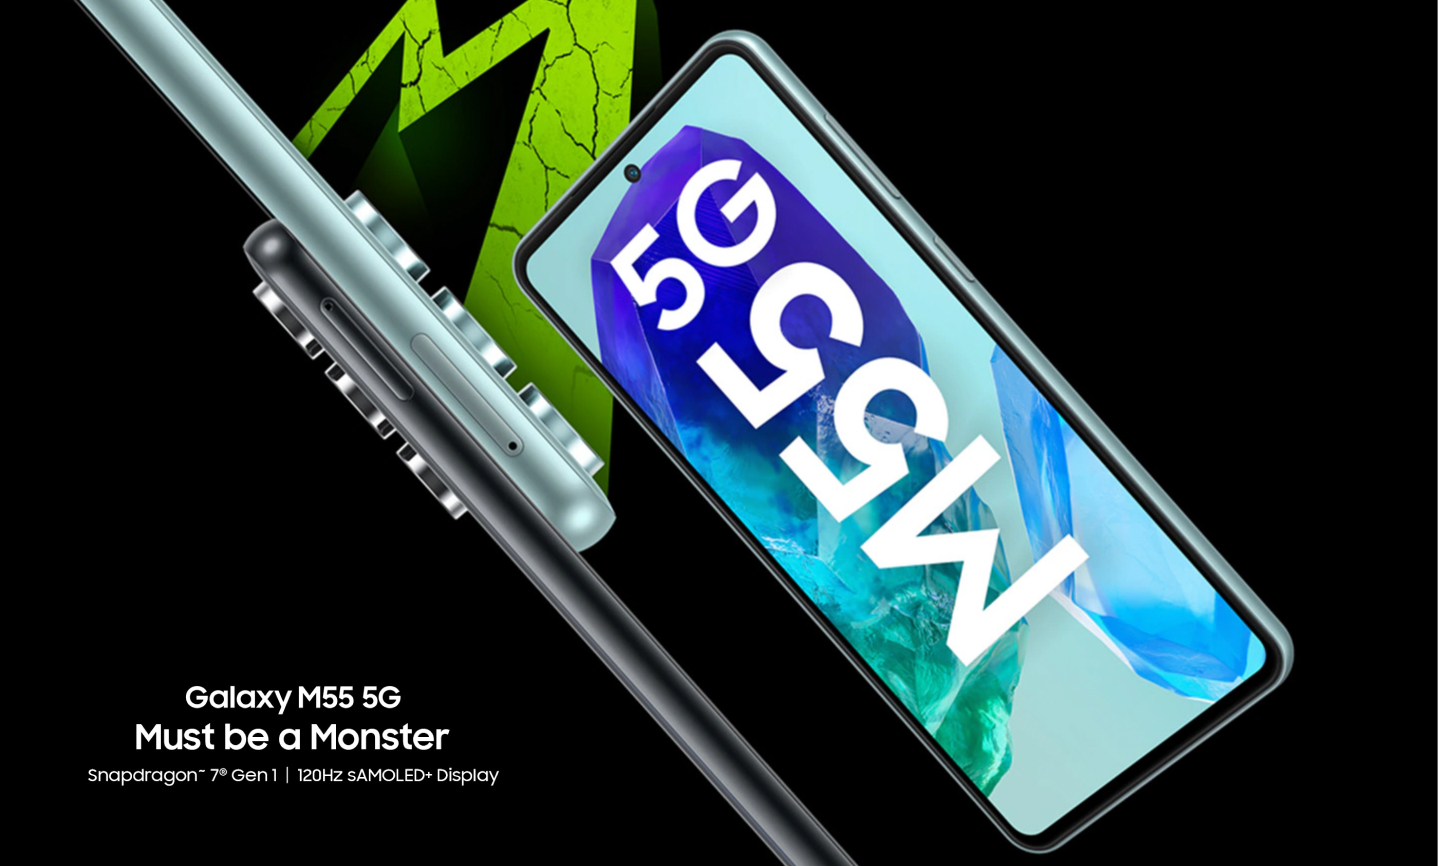 Samsung Galaxy M55 5G: Interesting option with Snapdragon 7 Gen 1 and 50MP front camera